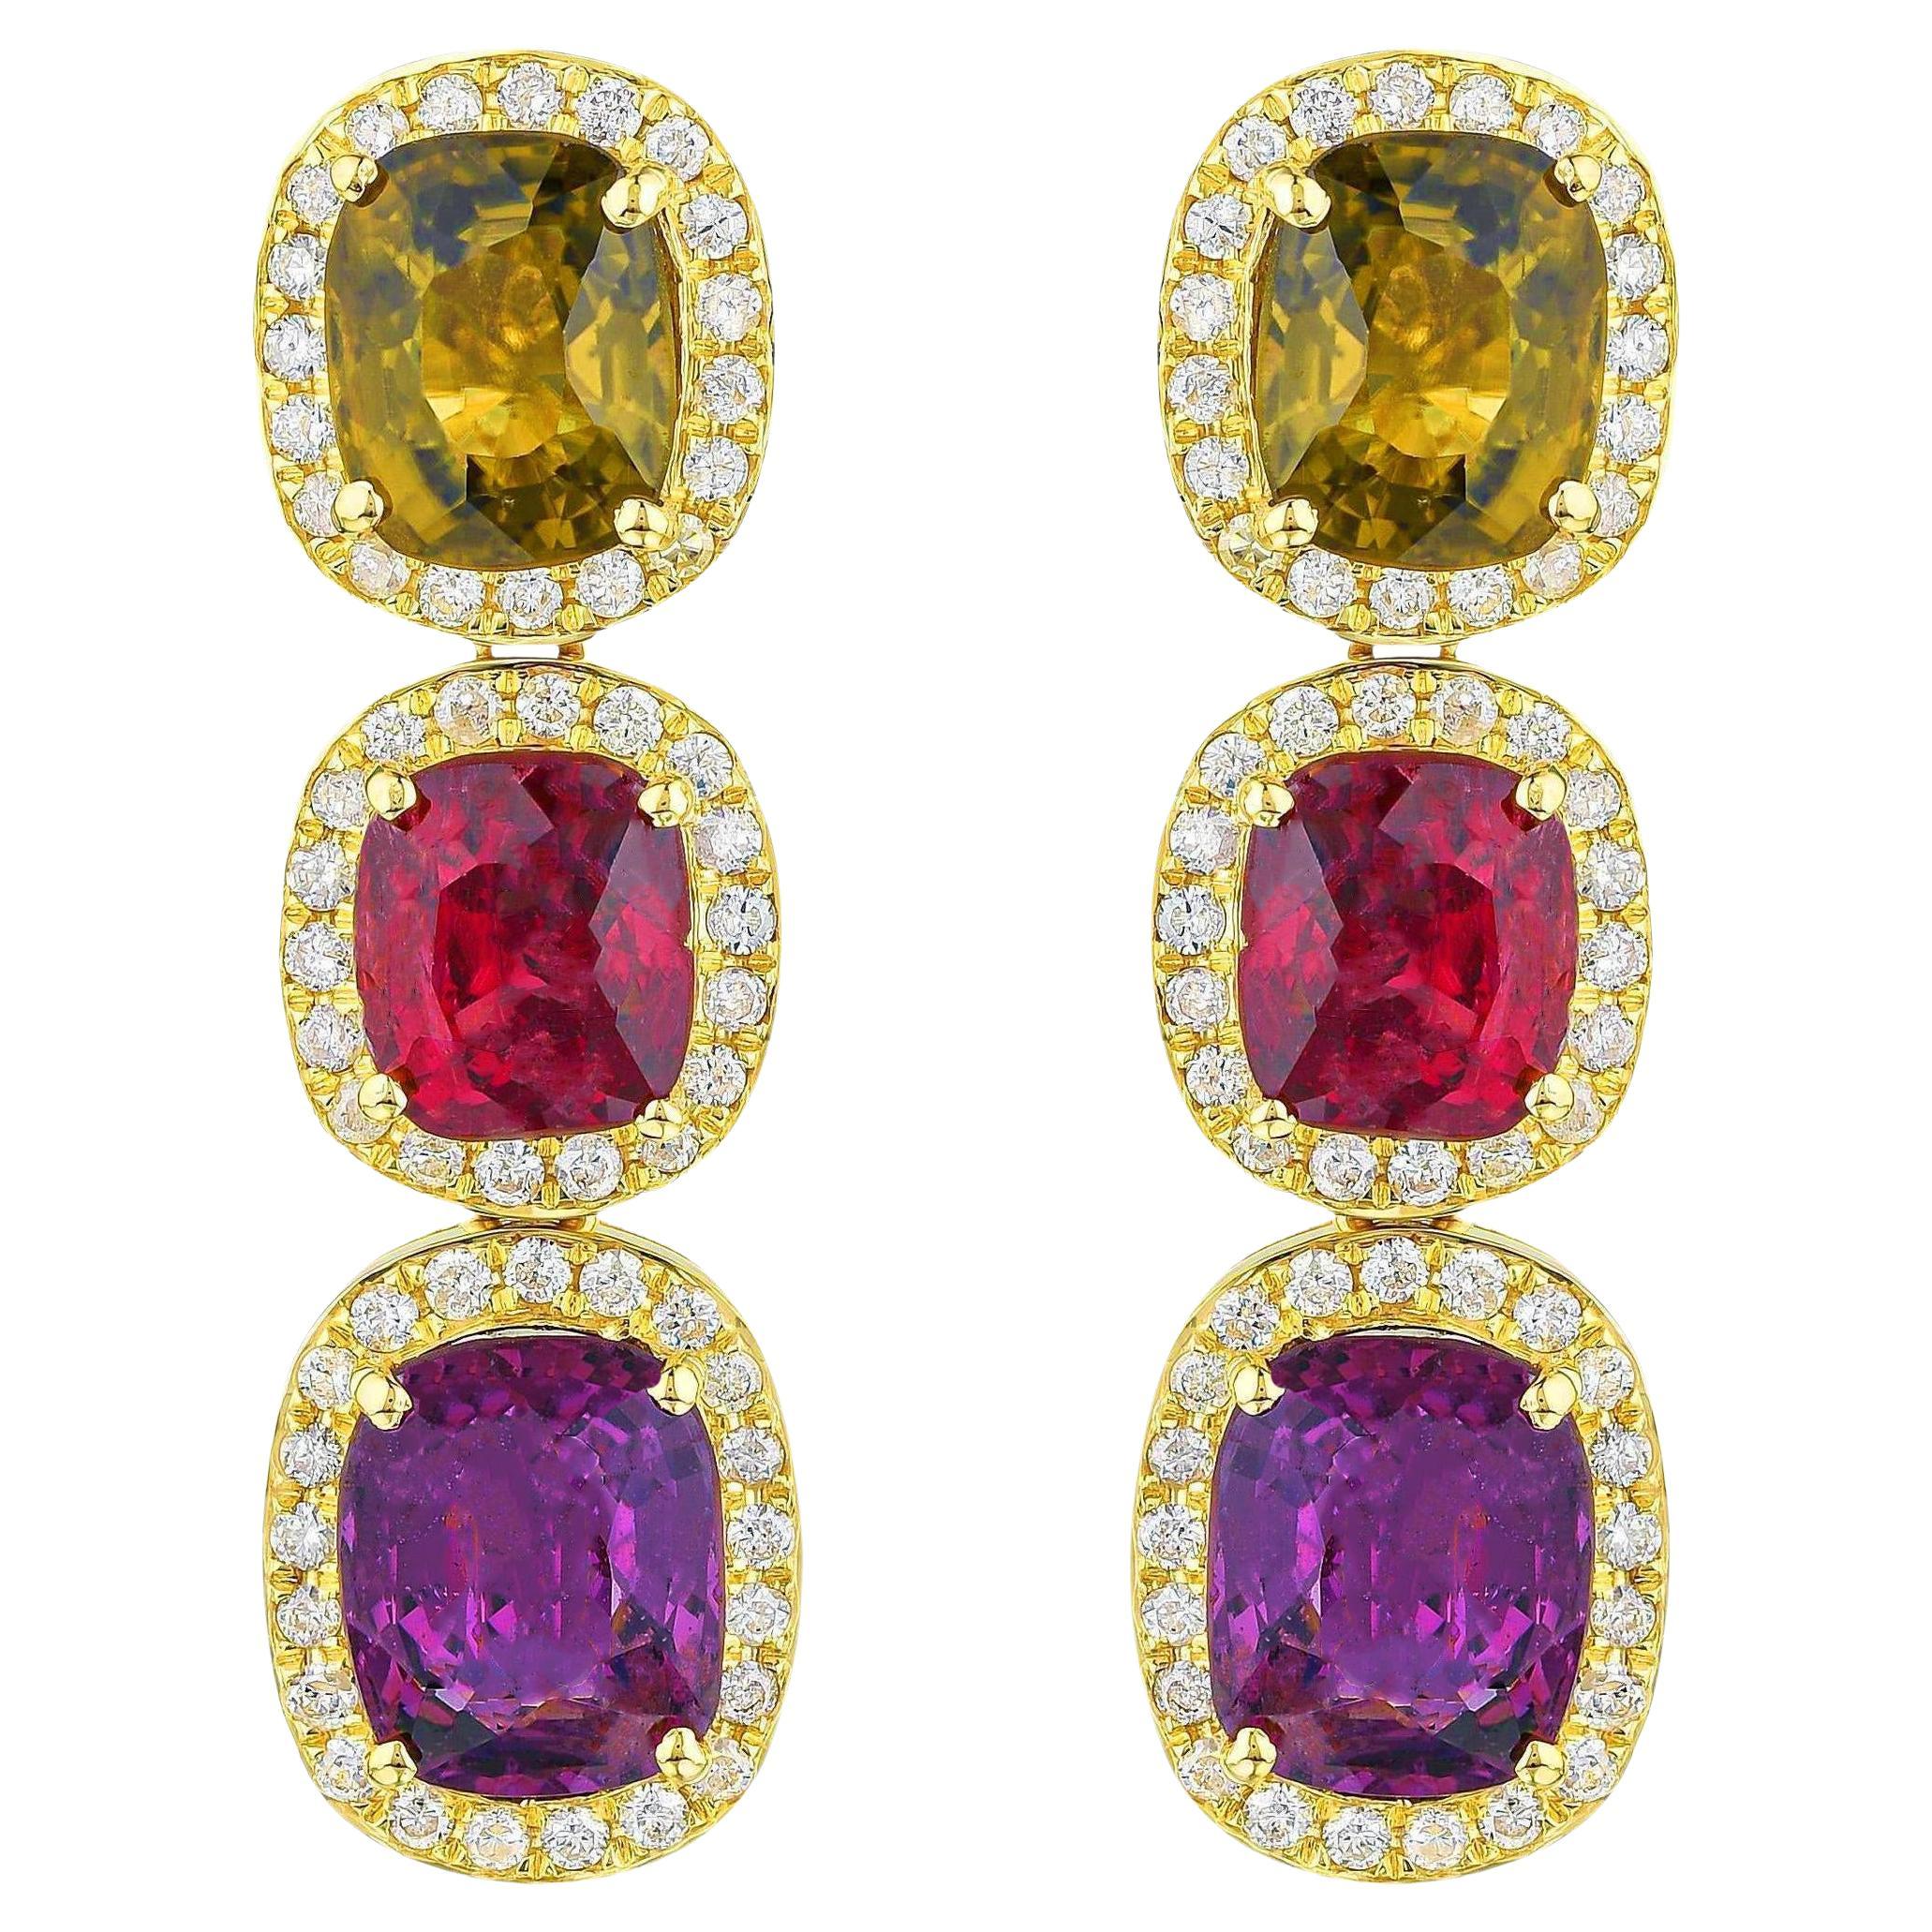 Contemporary Rare Natural Multicolored Spinel Earrings Diamond Halo 8.50 Carats 18K Gold For Sale